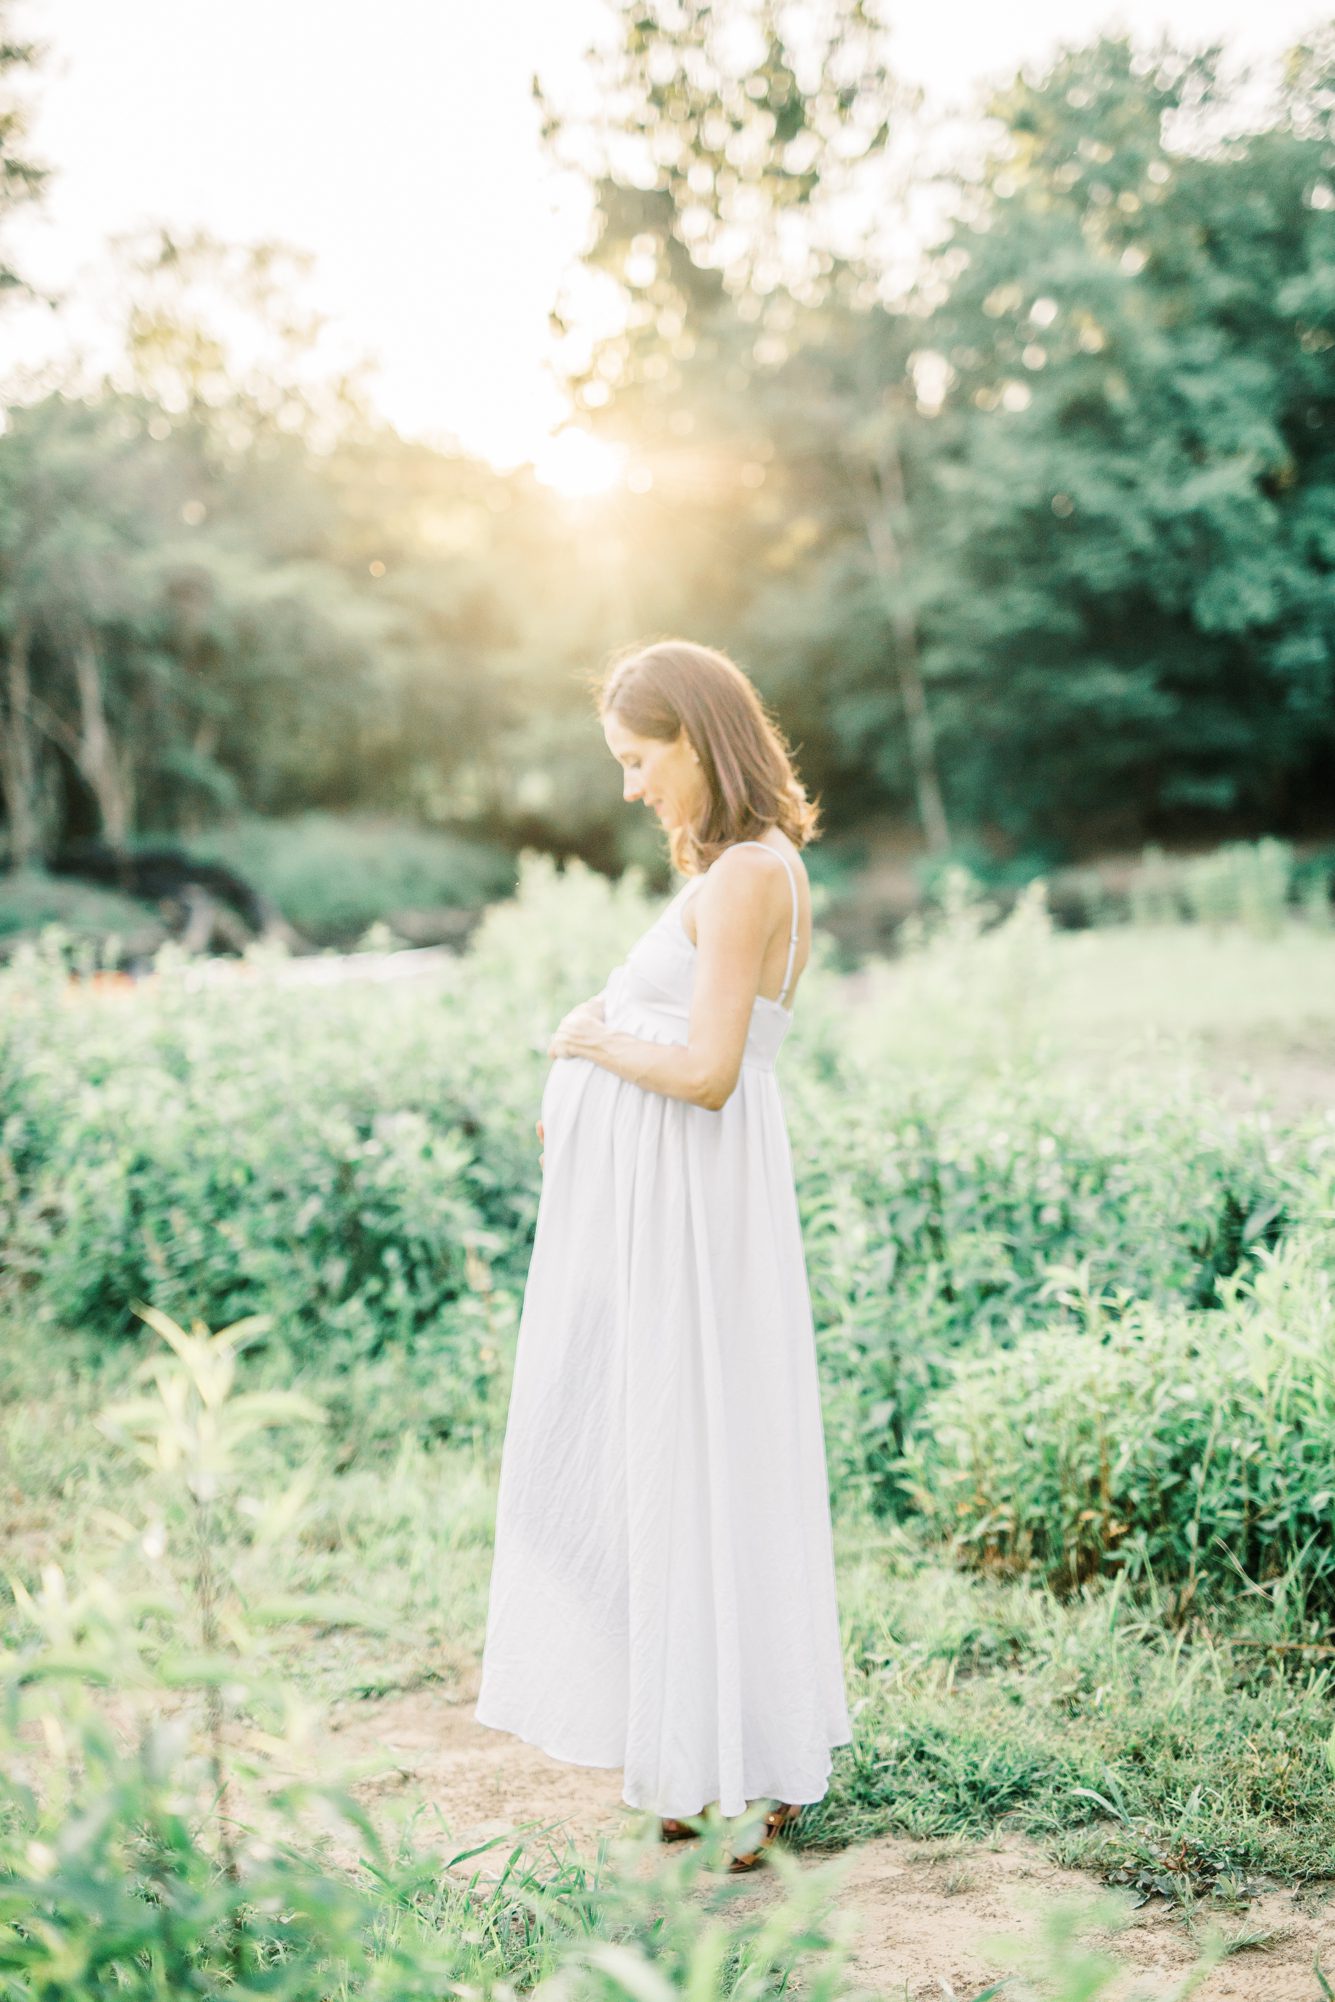 Dreamy maternity portrait from park by the Potomac River in Washington DC. Photo by LRG Portraits.